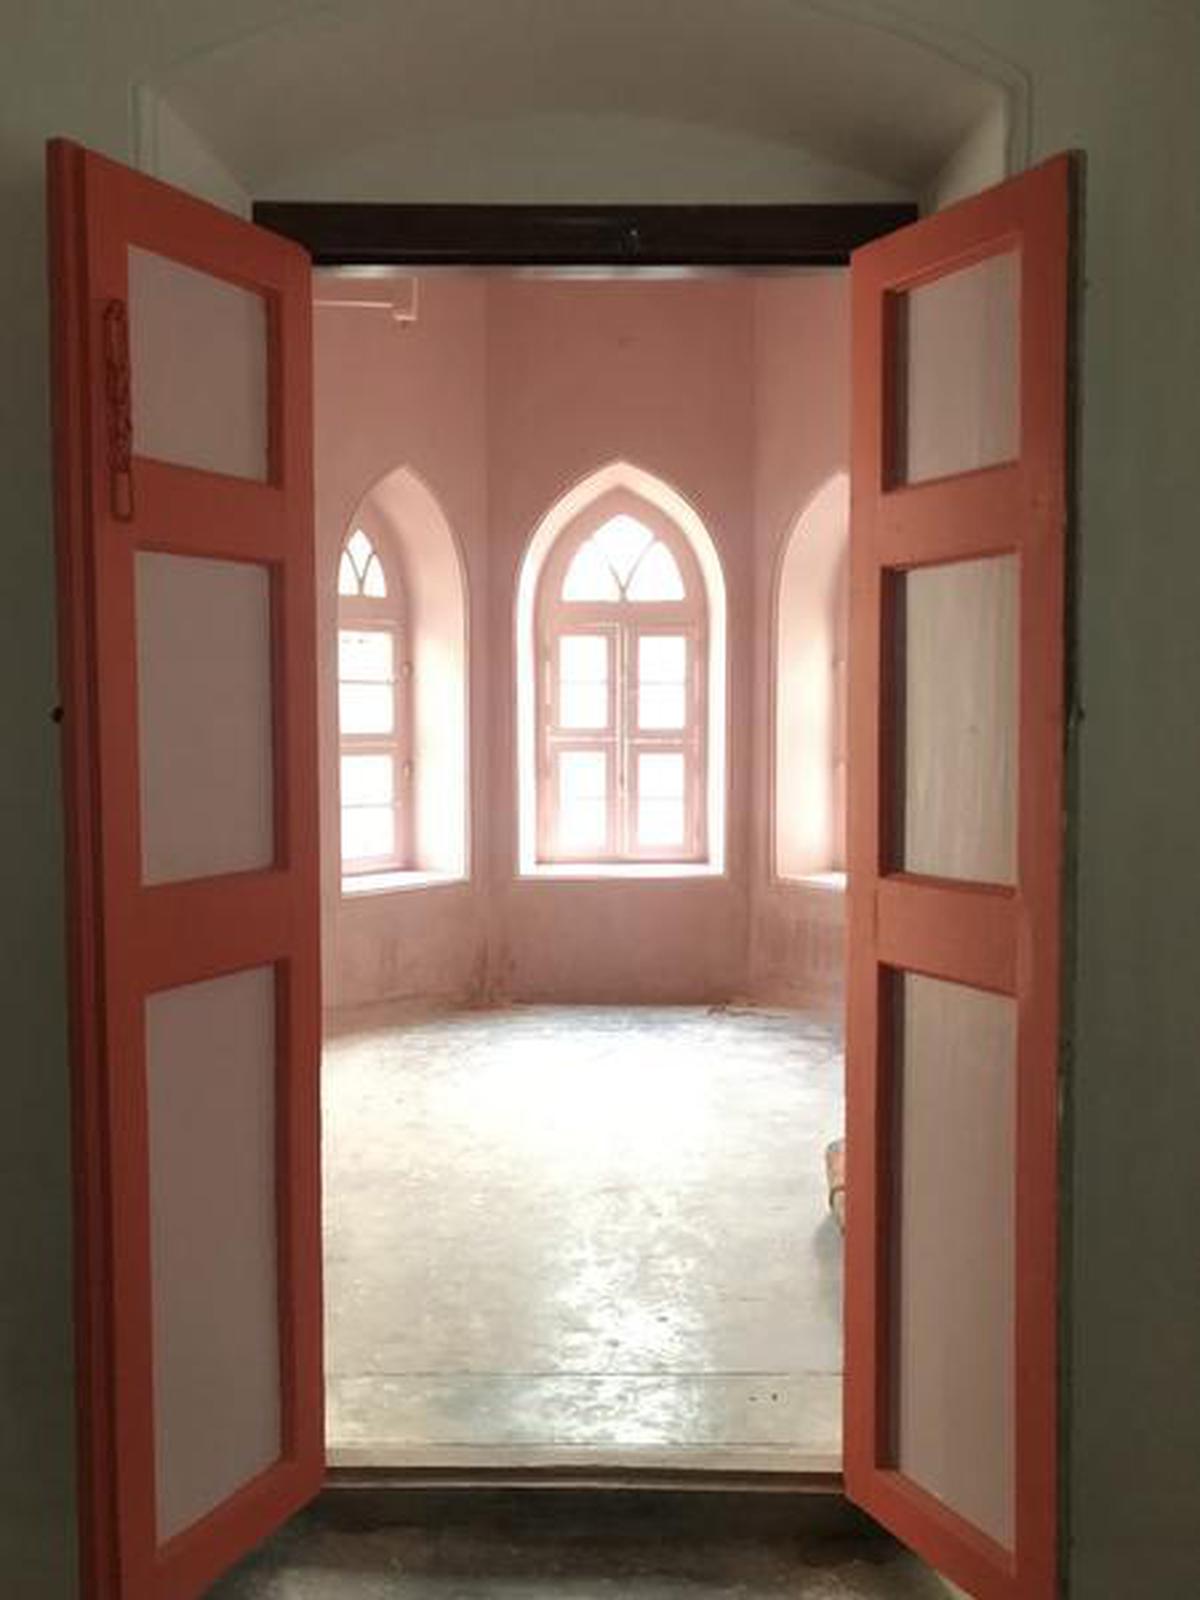 A 120-year-old bungalow in Mysuru finds new life as a chocolate factory